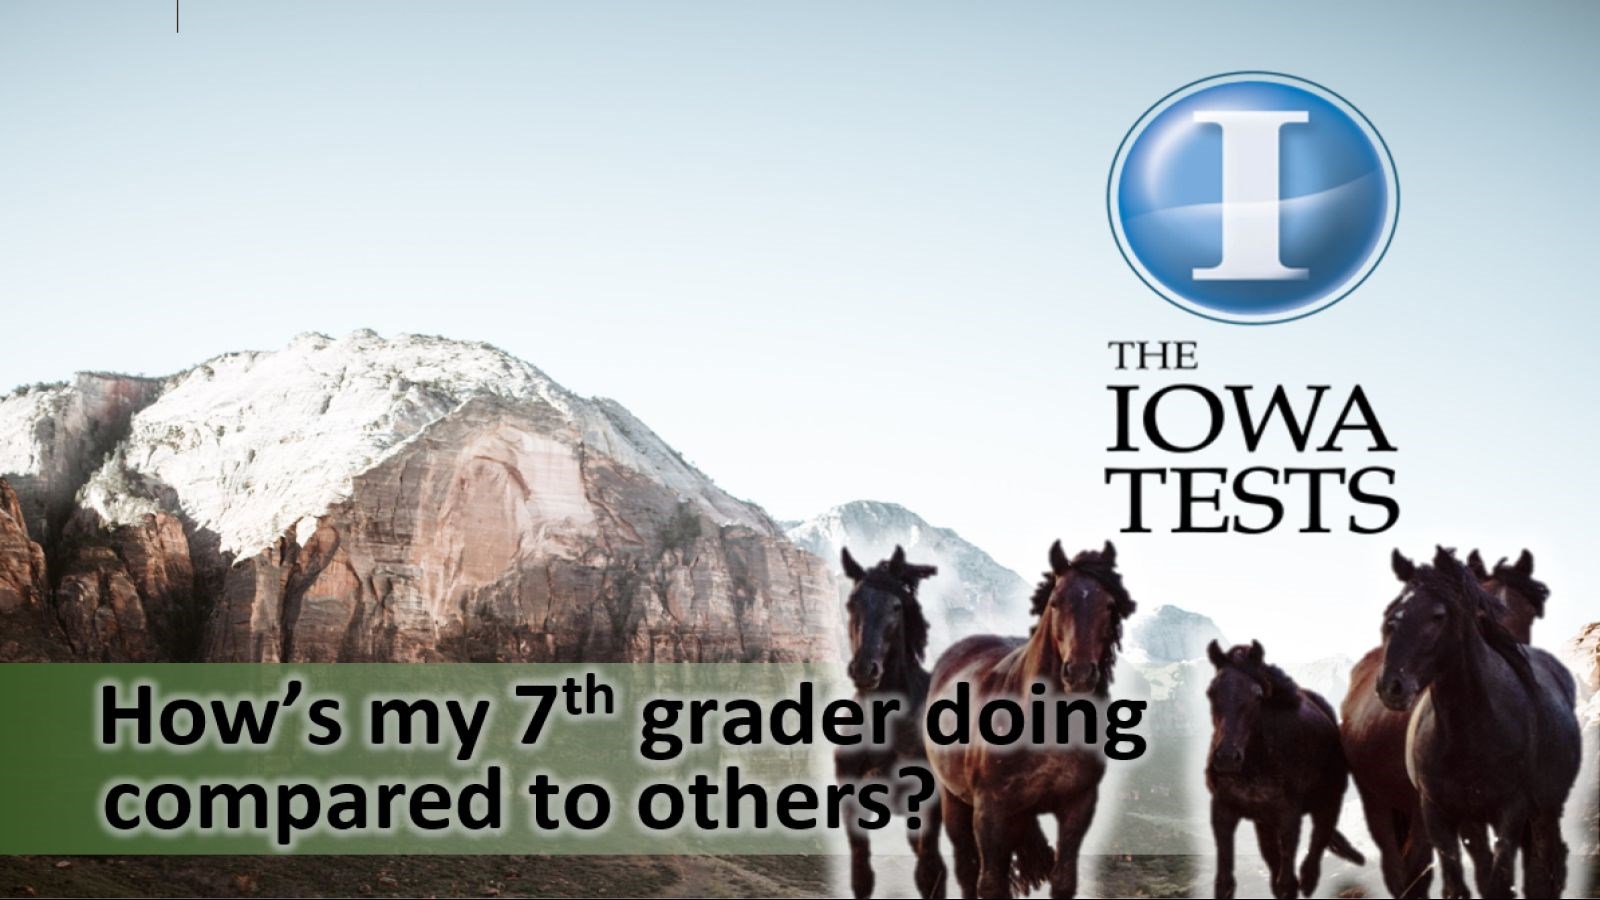 IOWA - How's my 7th grader doing compared to others?